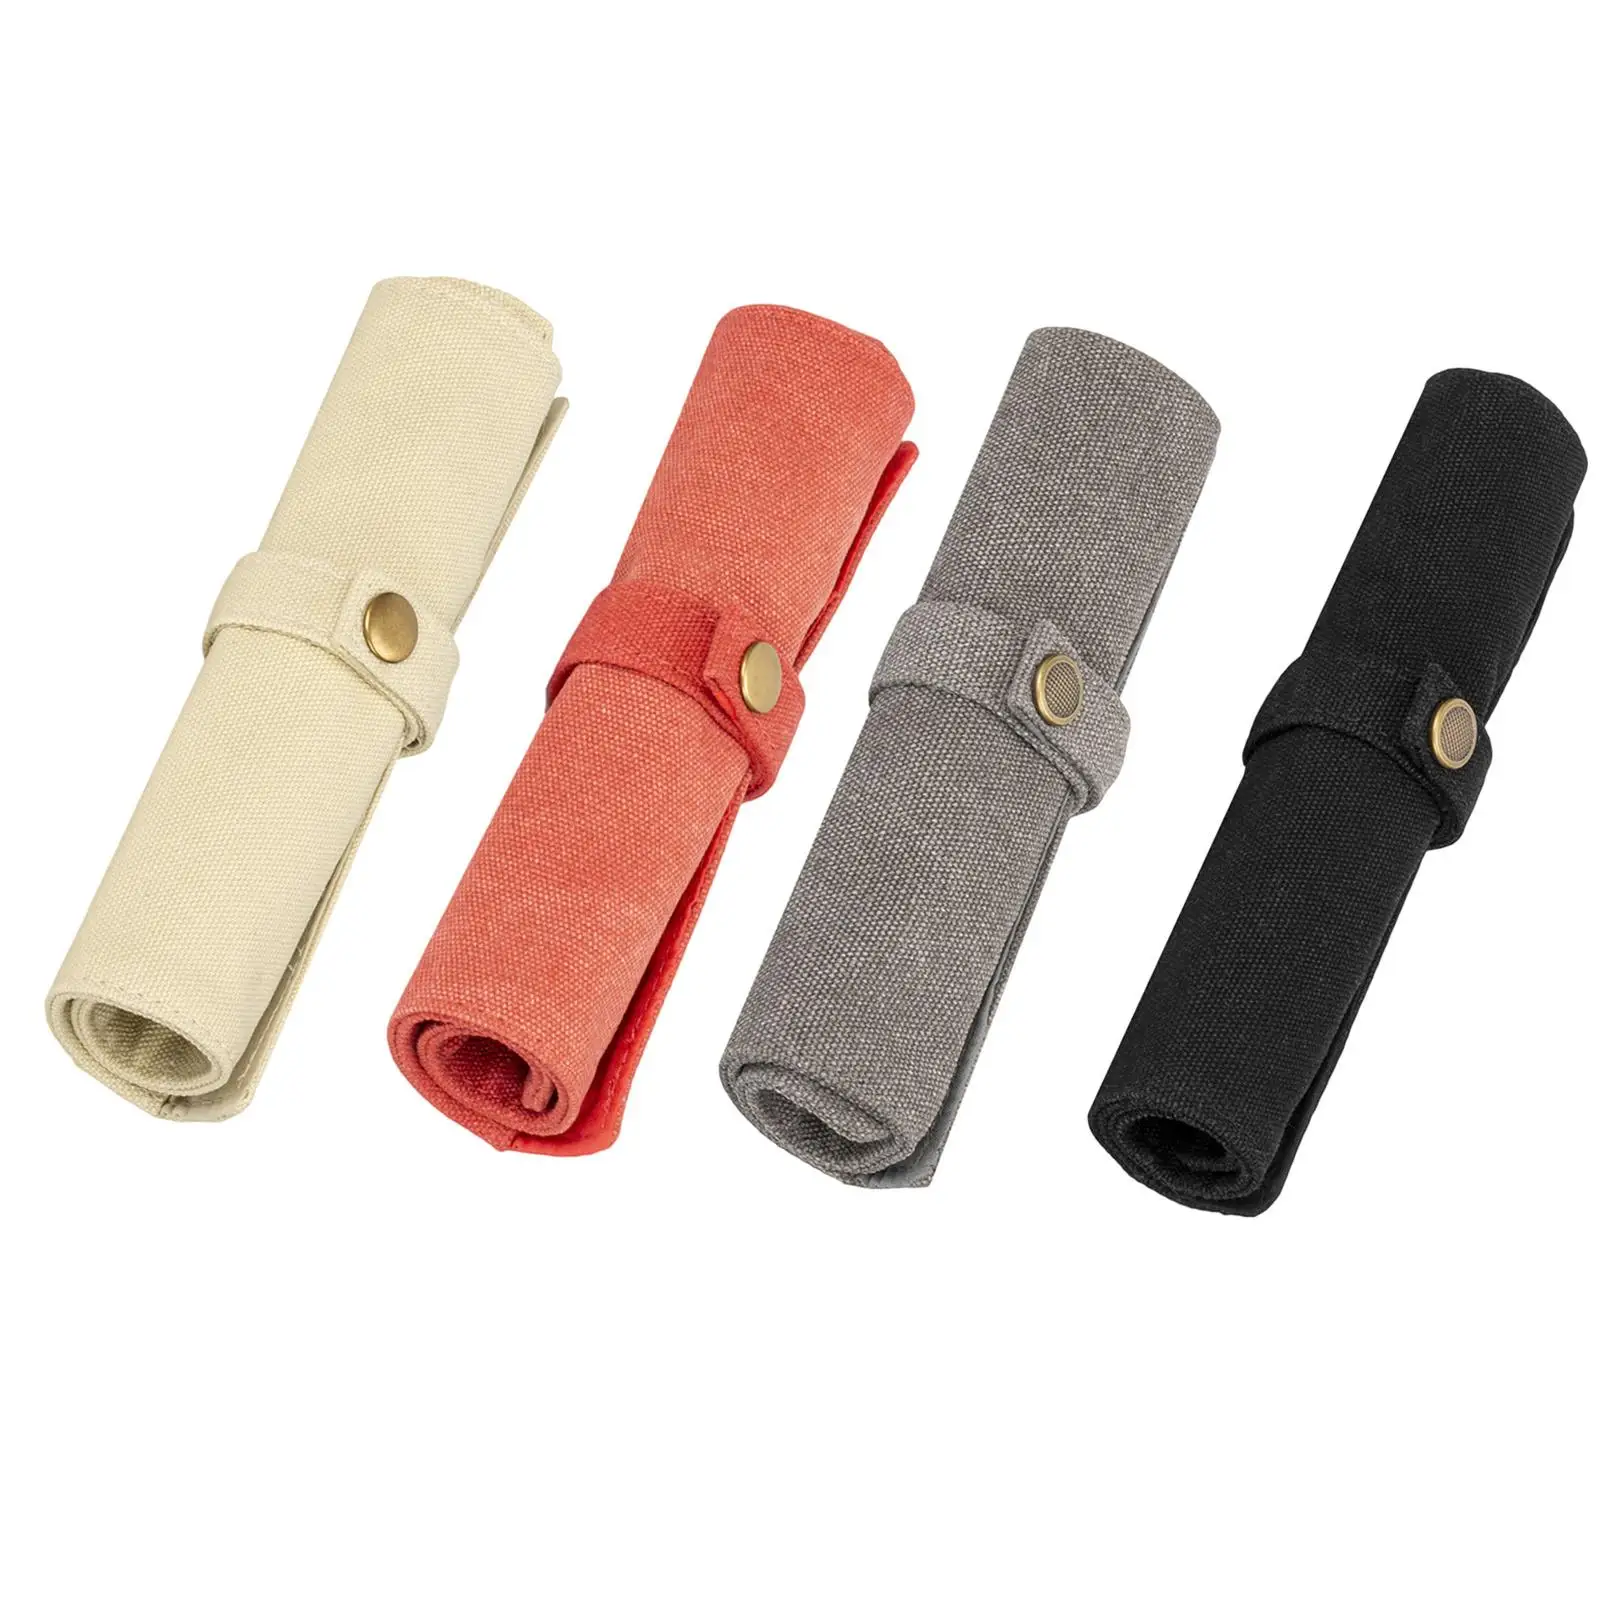 Portable Watch Roll Organizer Canvas Foldable Protection  for Home